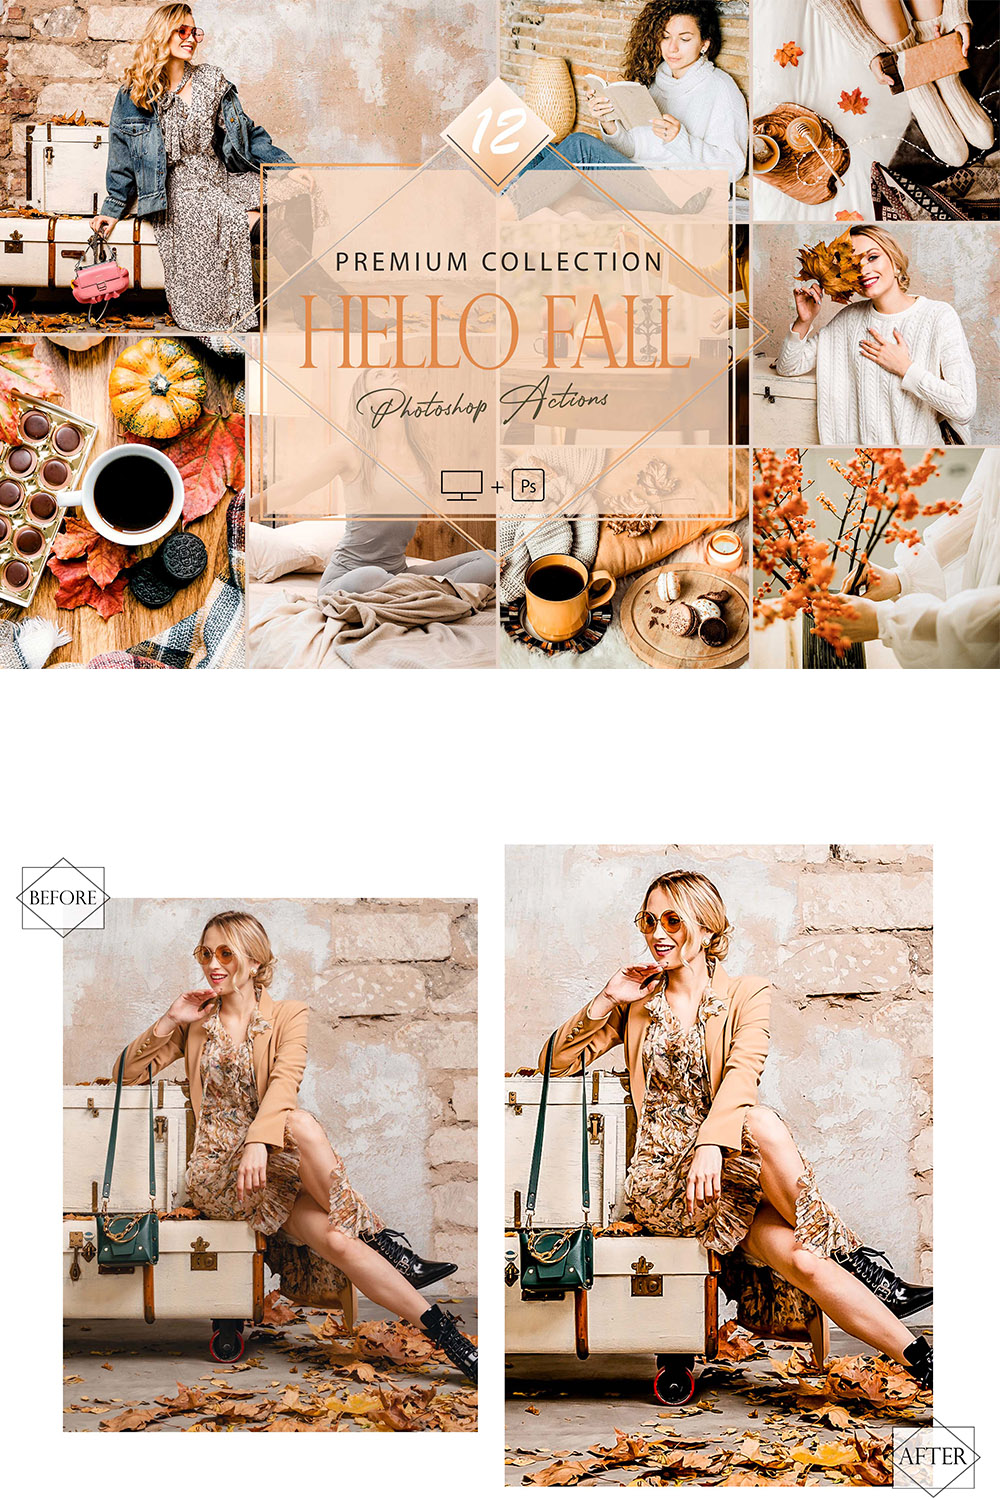 12 Photoshop Actions, Hello Fall Ps Action, Bright ACR Preset, Fall Filter, Lifestyle Theme For Instagram, Autumn Presets, Warm portrait pinterest preview image.